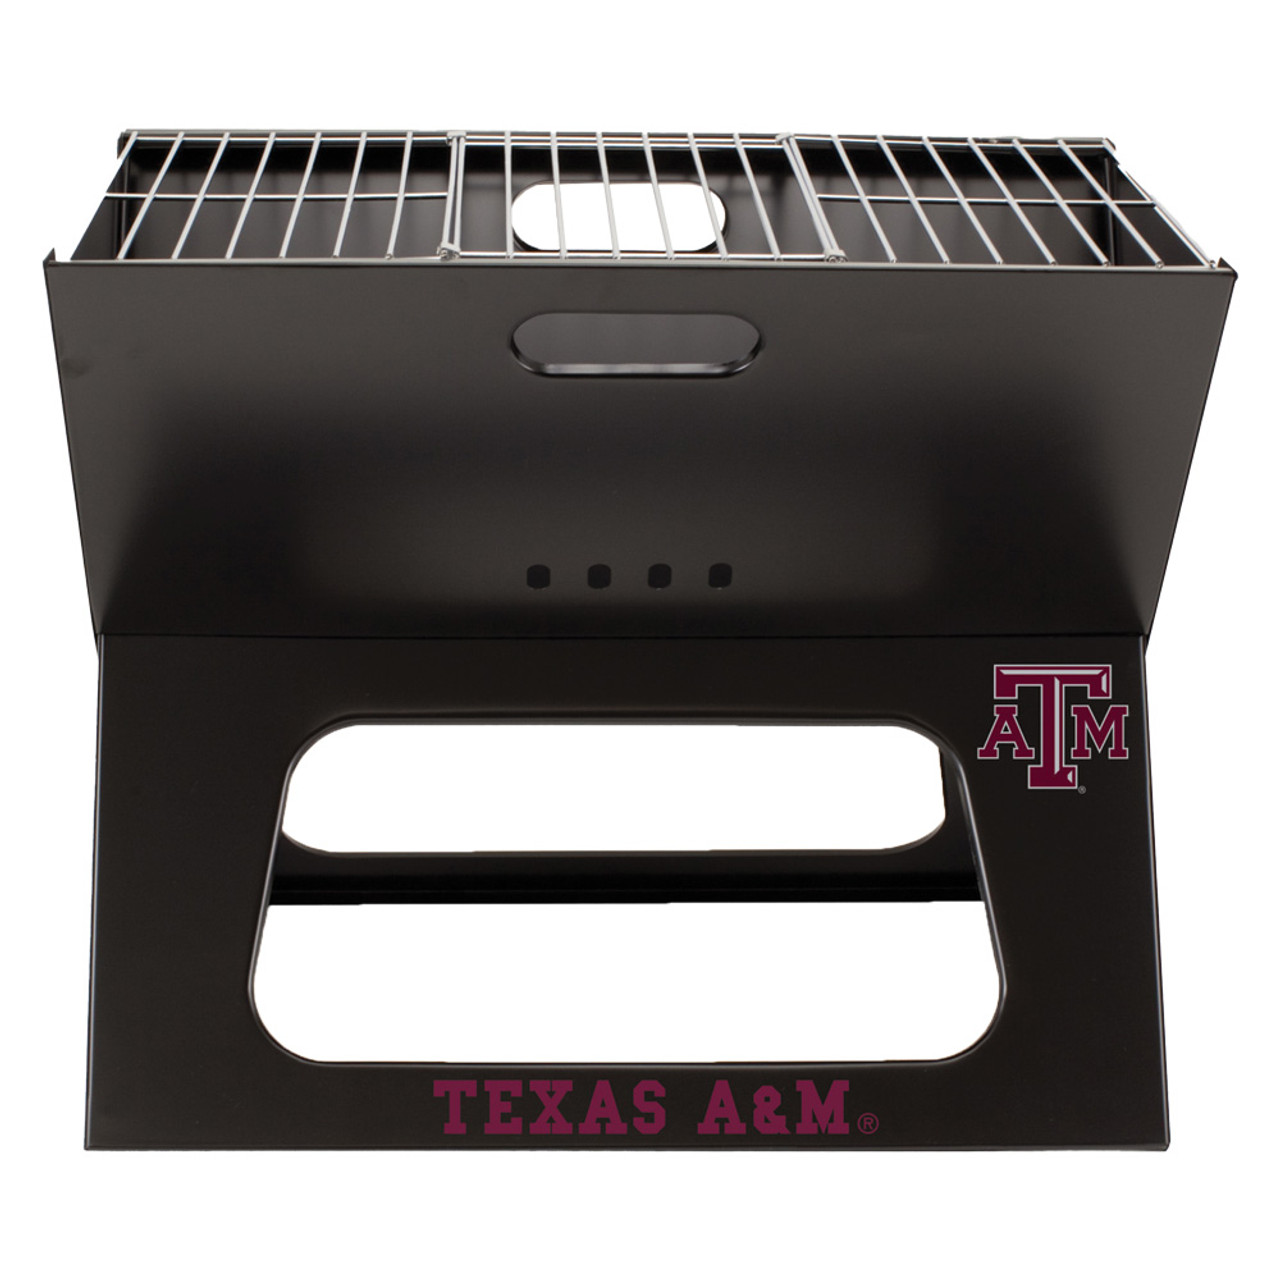 arve Landmand inden længe Texas A&M Aggies X-Grill Portable Charcoal Grill with Carry Case | Black  (In Store Pick Up Only) - The Warehouse at C.C. Creations